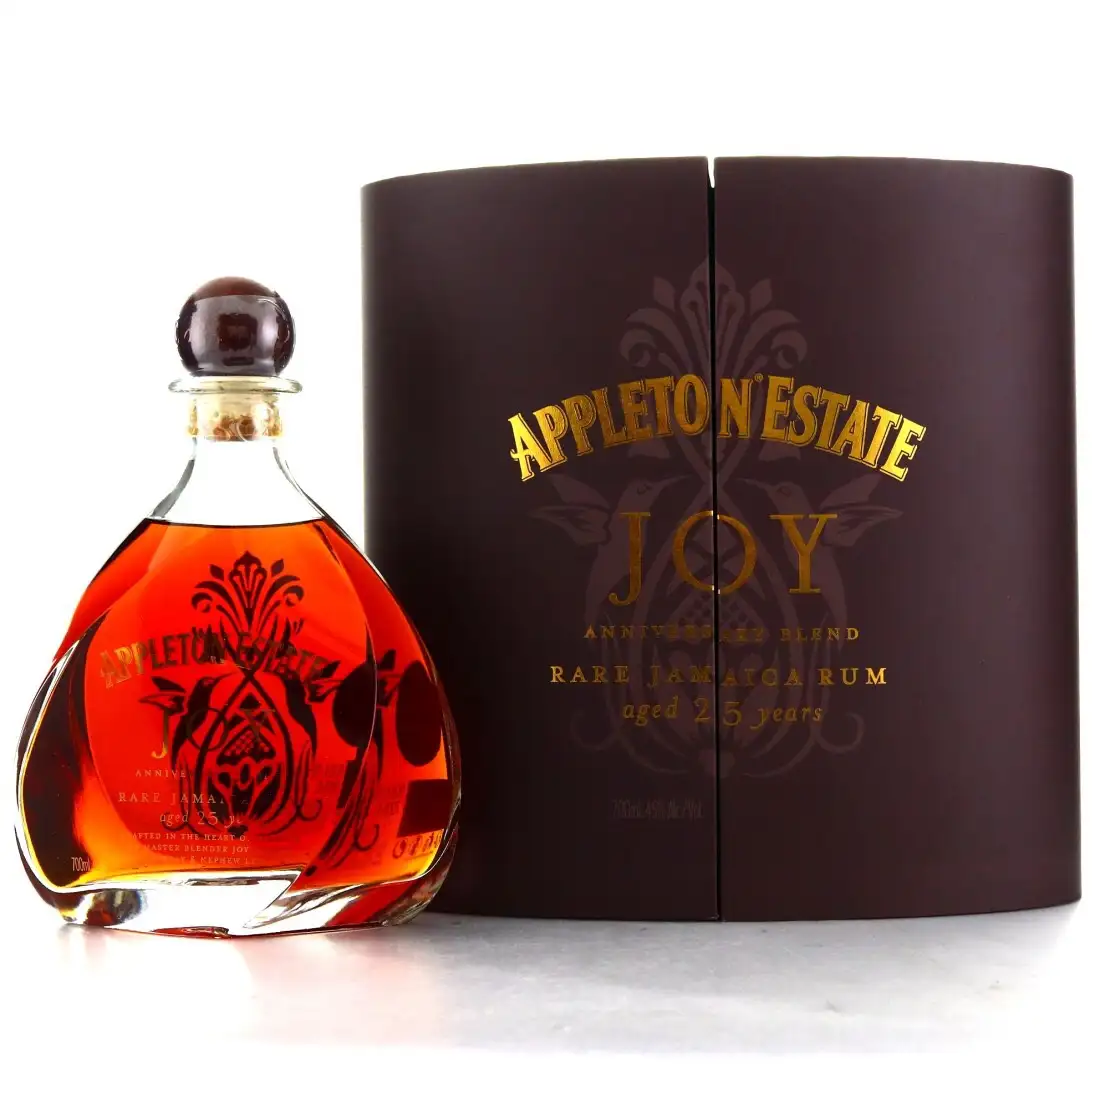 Image of the front of the bottle of the rum Joy